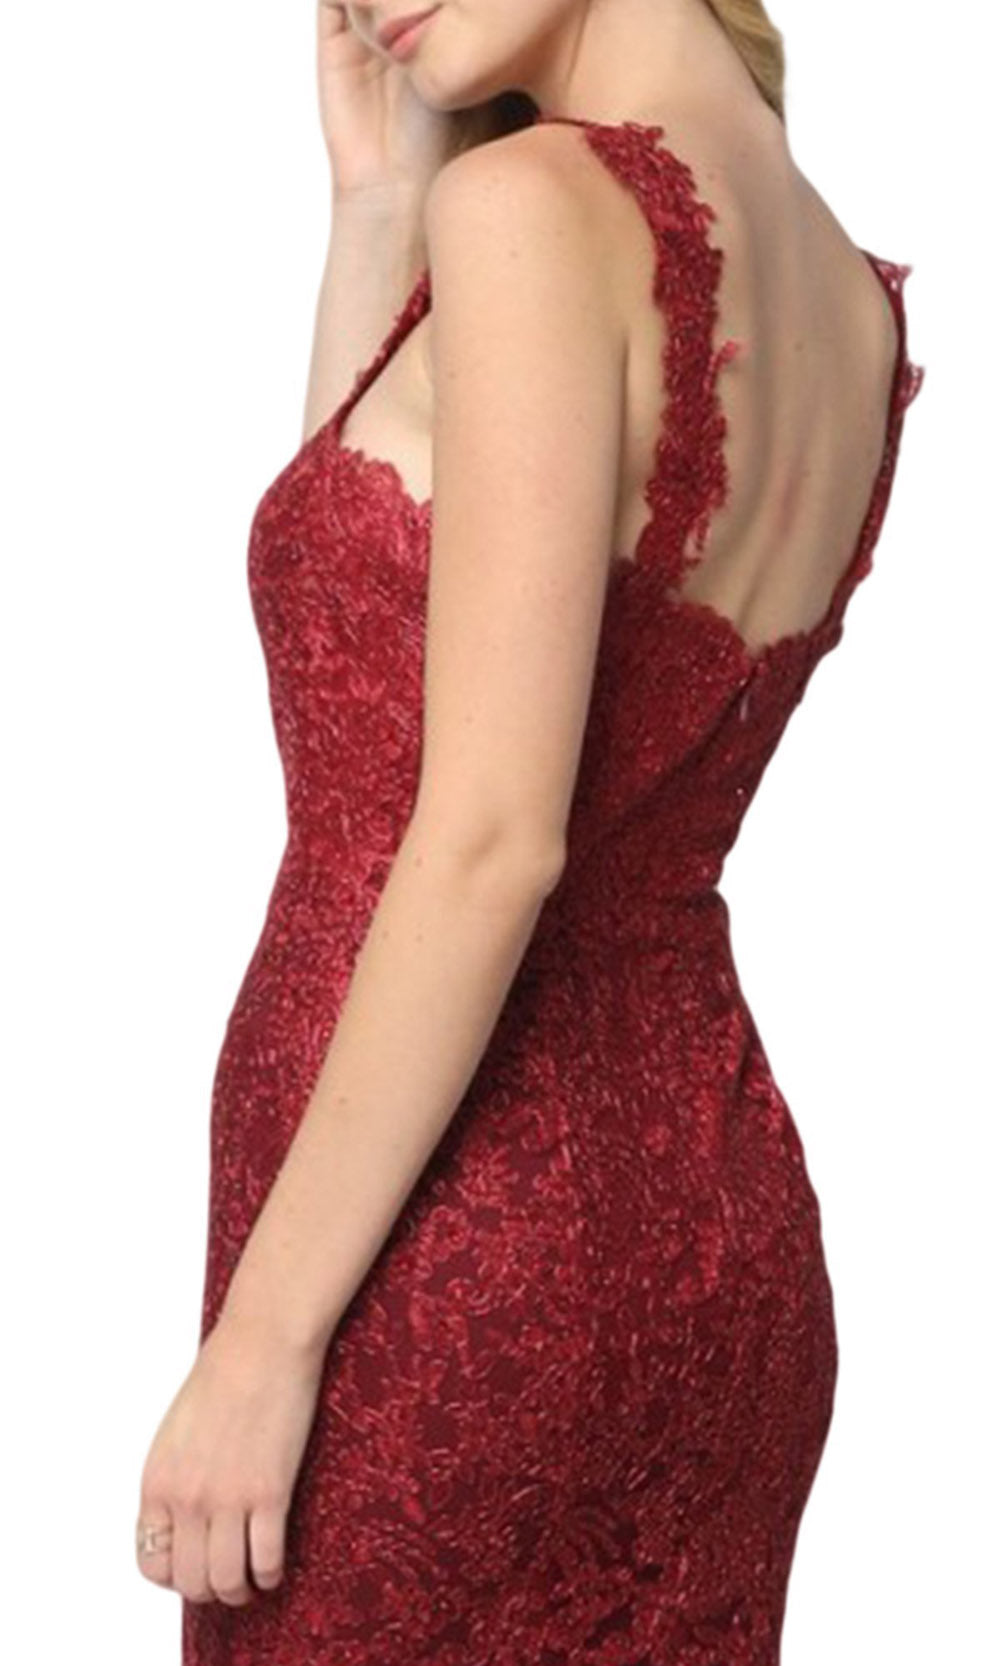 Nox Anabel - Lace Sweetheart Mermaid Evening Gown R216 - 1 pc Silver In Size S Available CCSALE S / Burgundy